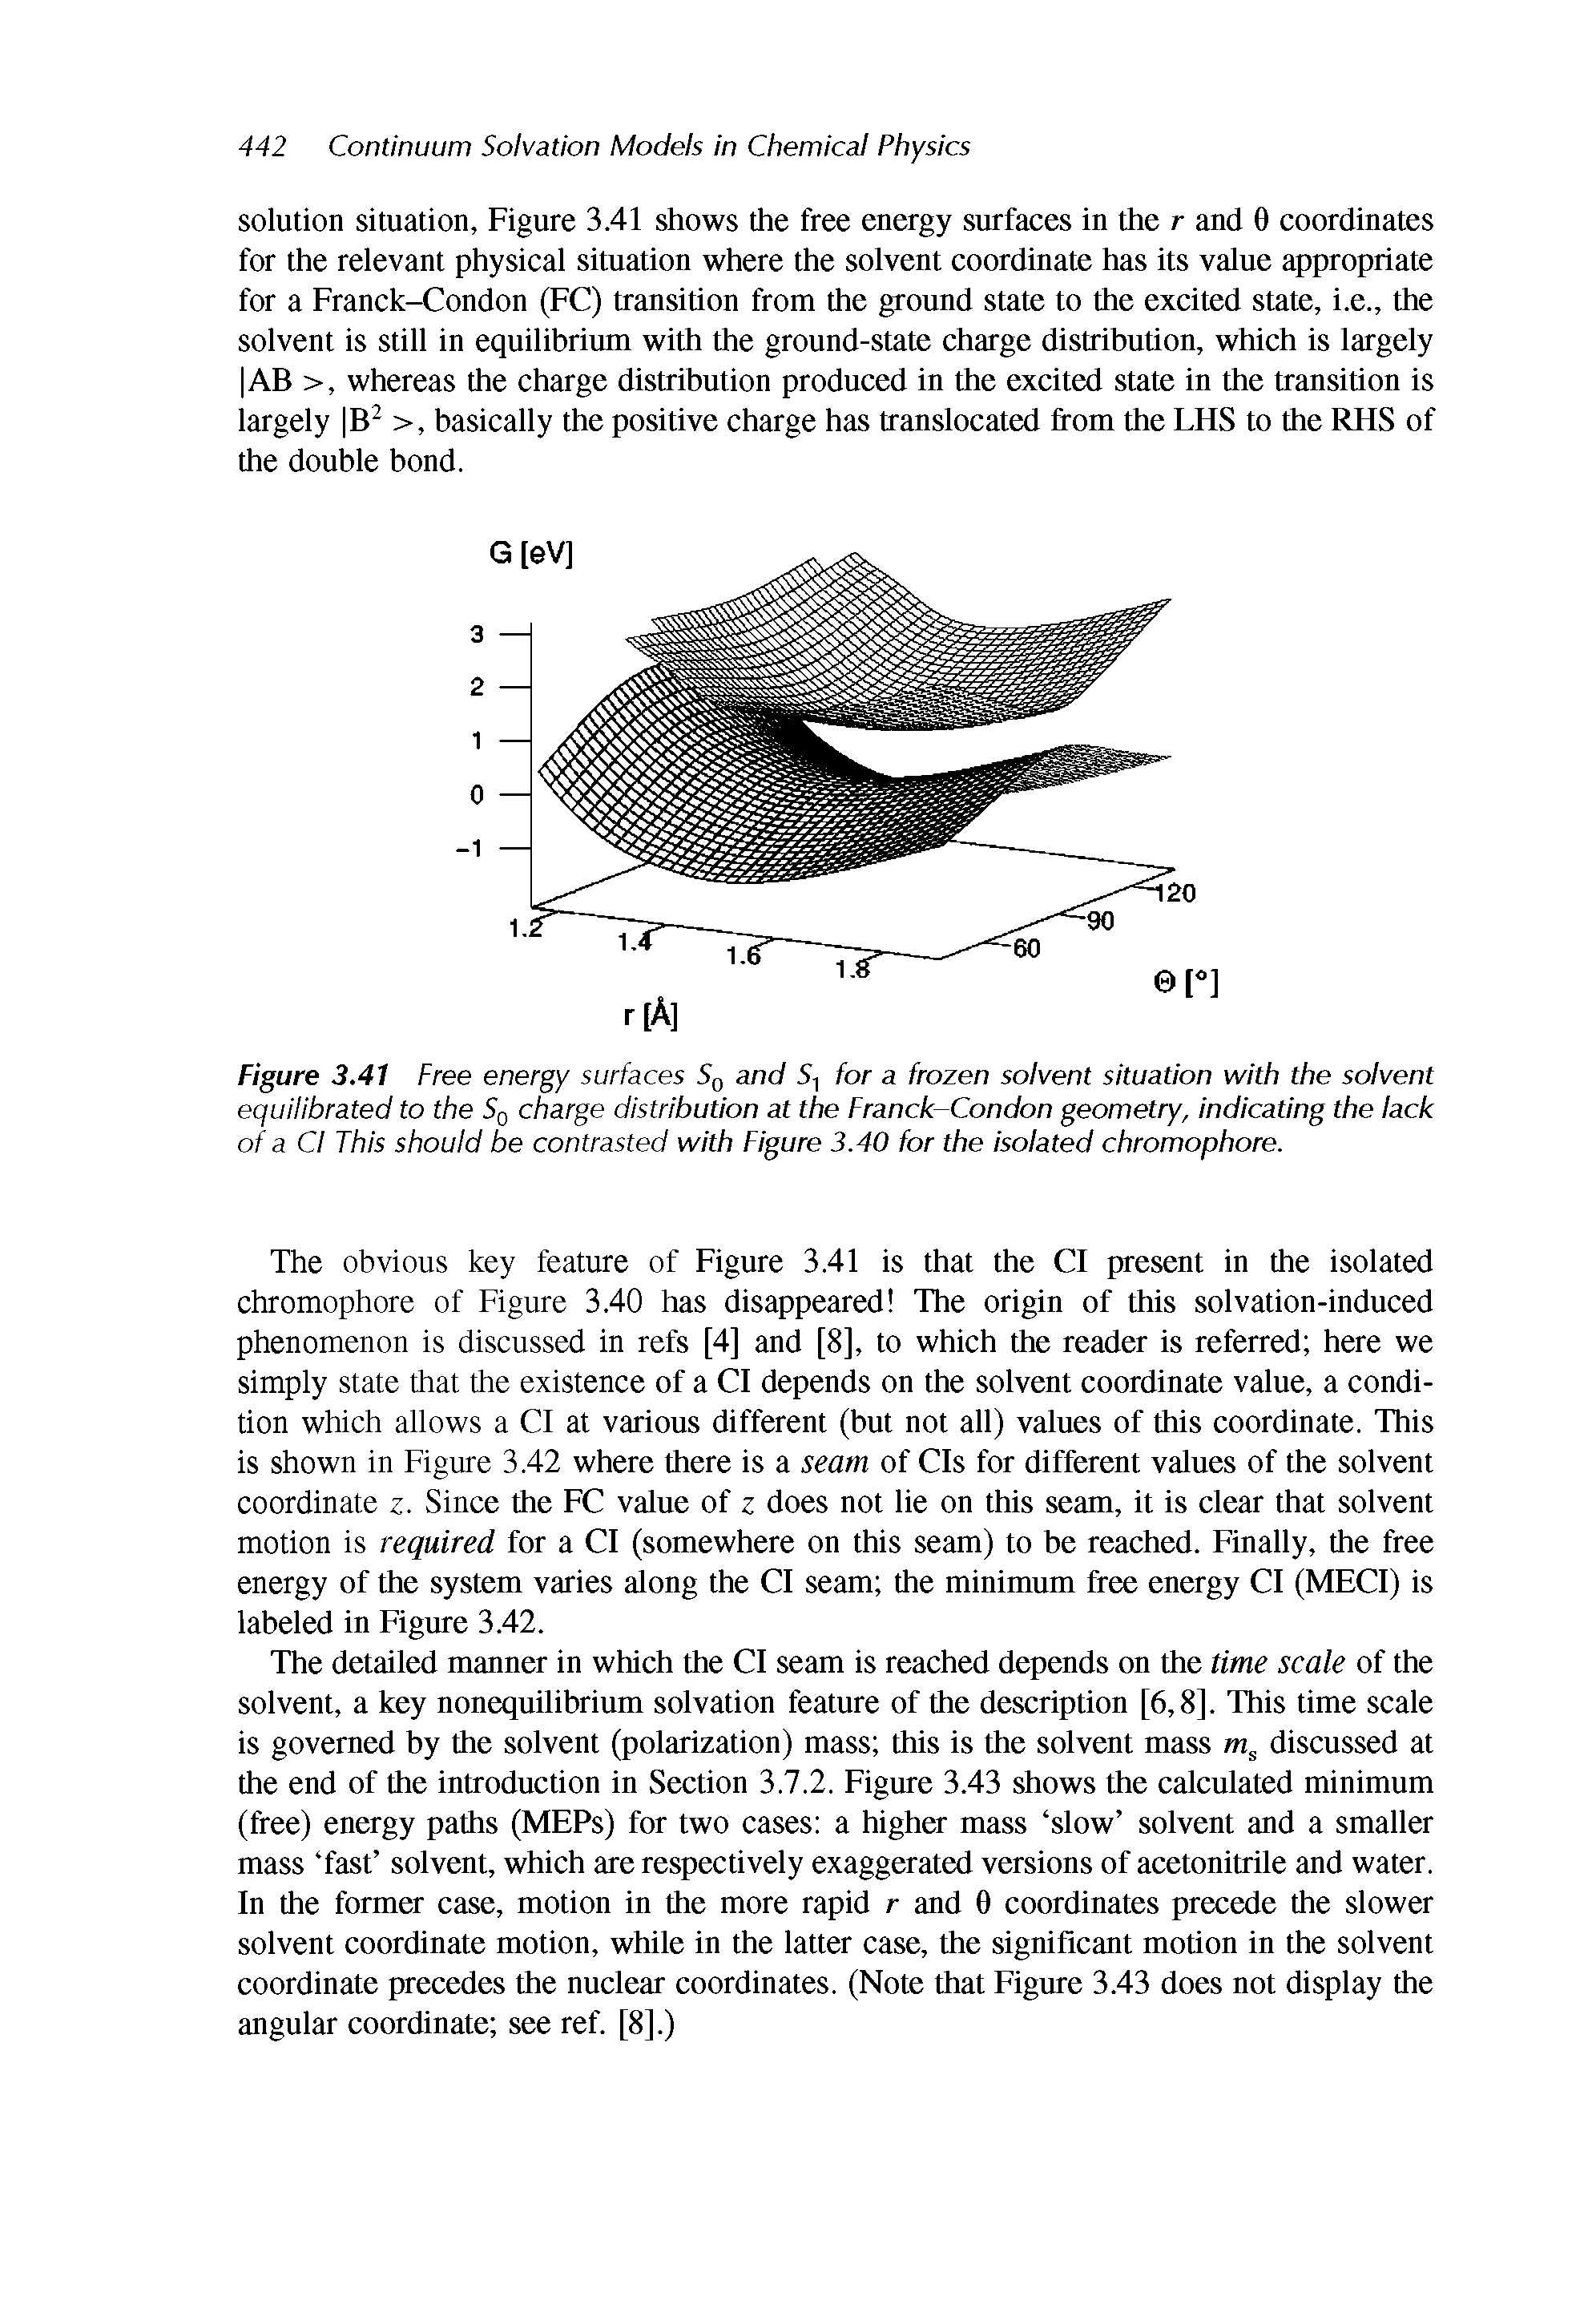 Figure 3.41 Free energy surfaces S0 and 5, for a frozen solvent situation with the solvent equilibrated to the S0 charge distribution at the Franck-Condon geometry, indicating the lack of a Cl This should be contrasted with Figure 3.40 for the isolated chromophore.